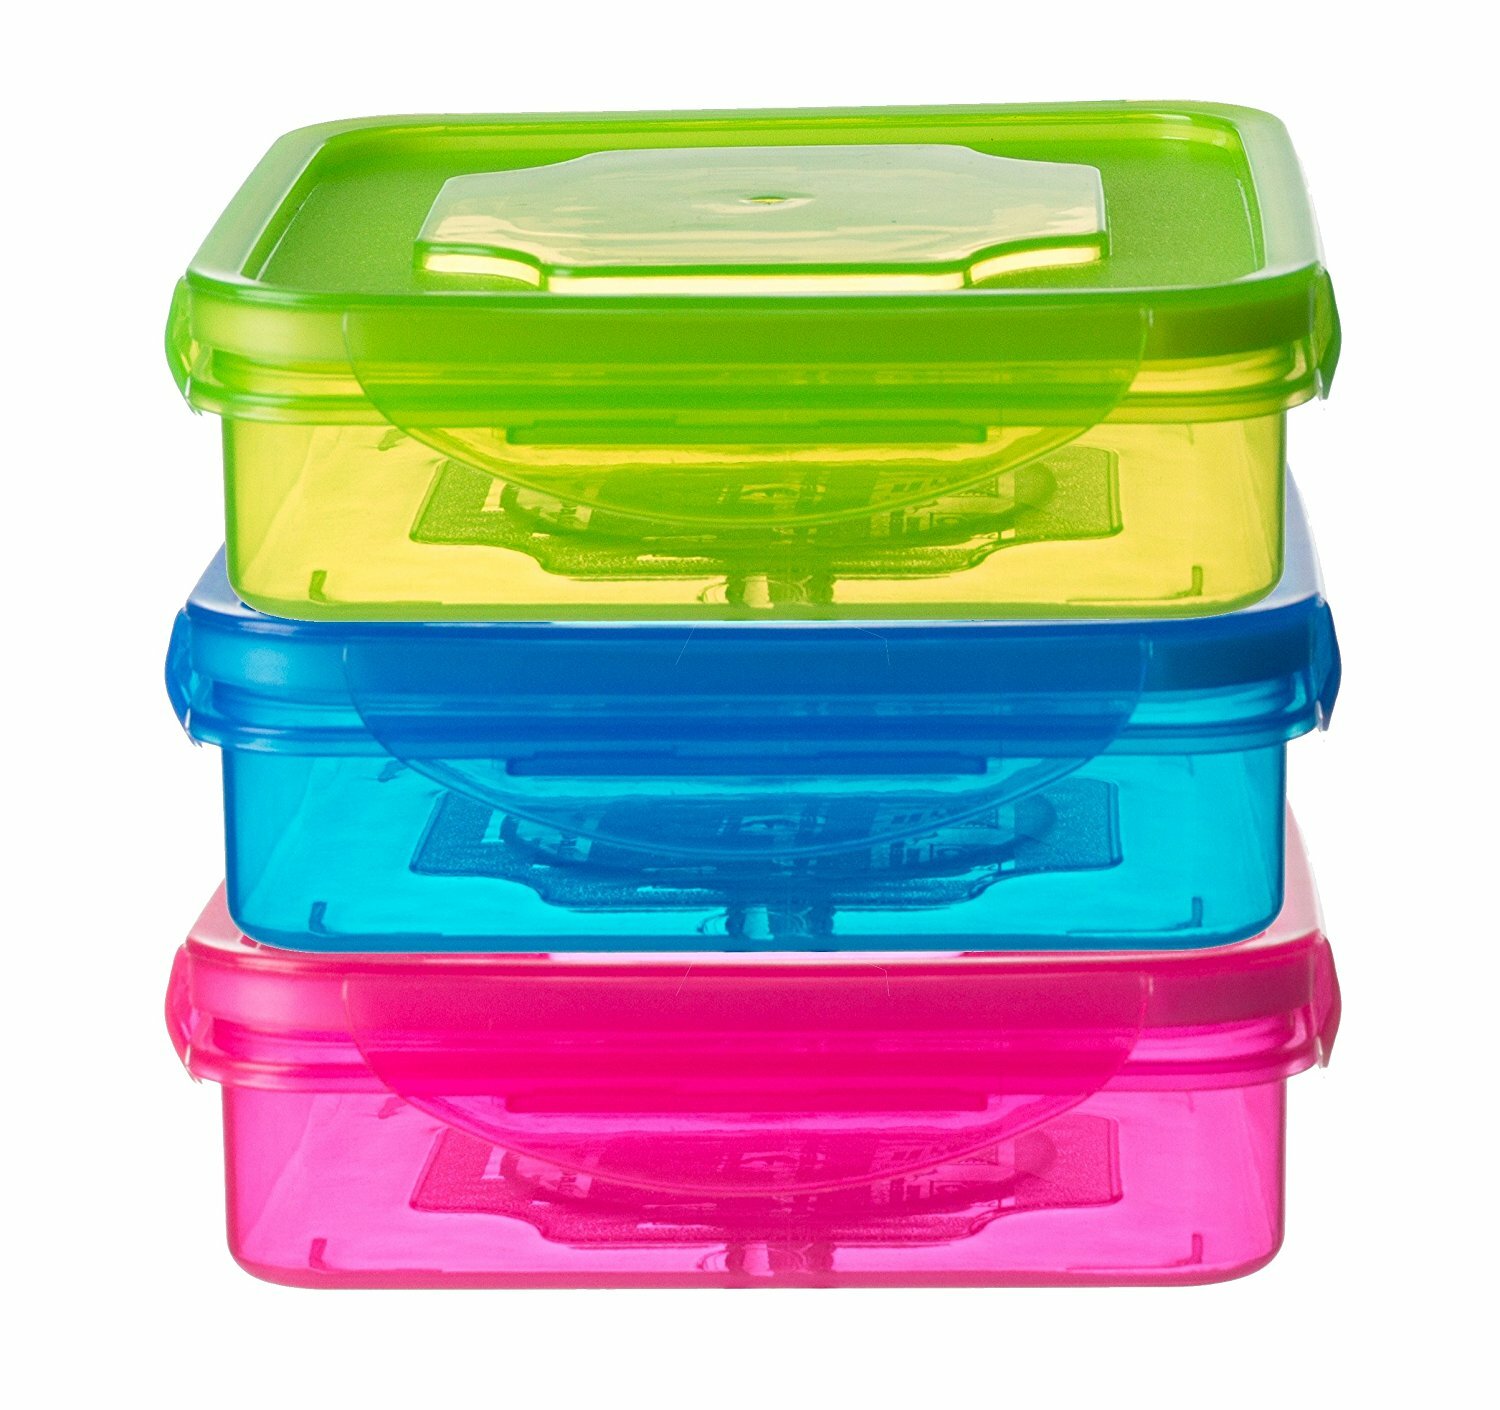 Rubbermaid Glass Baking Dish 8-Piece Set Only $21.99 Shipped, Oven,  Microwave & Freezer Safe